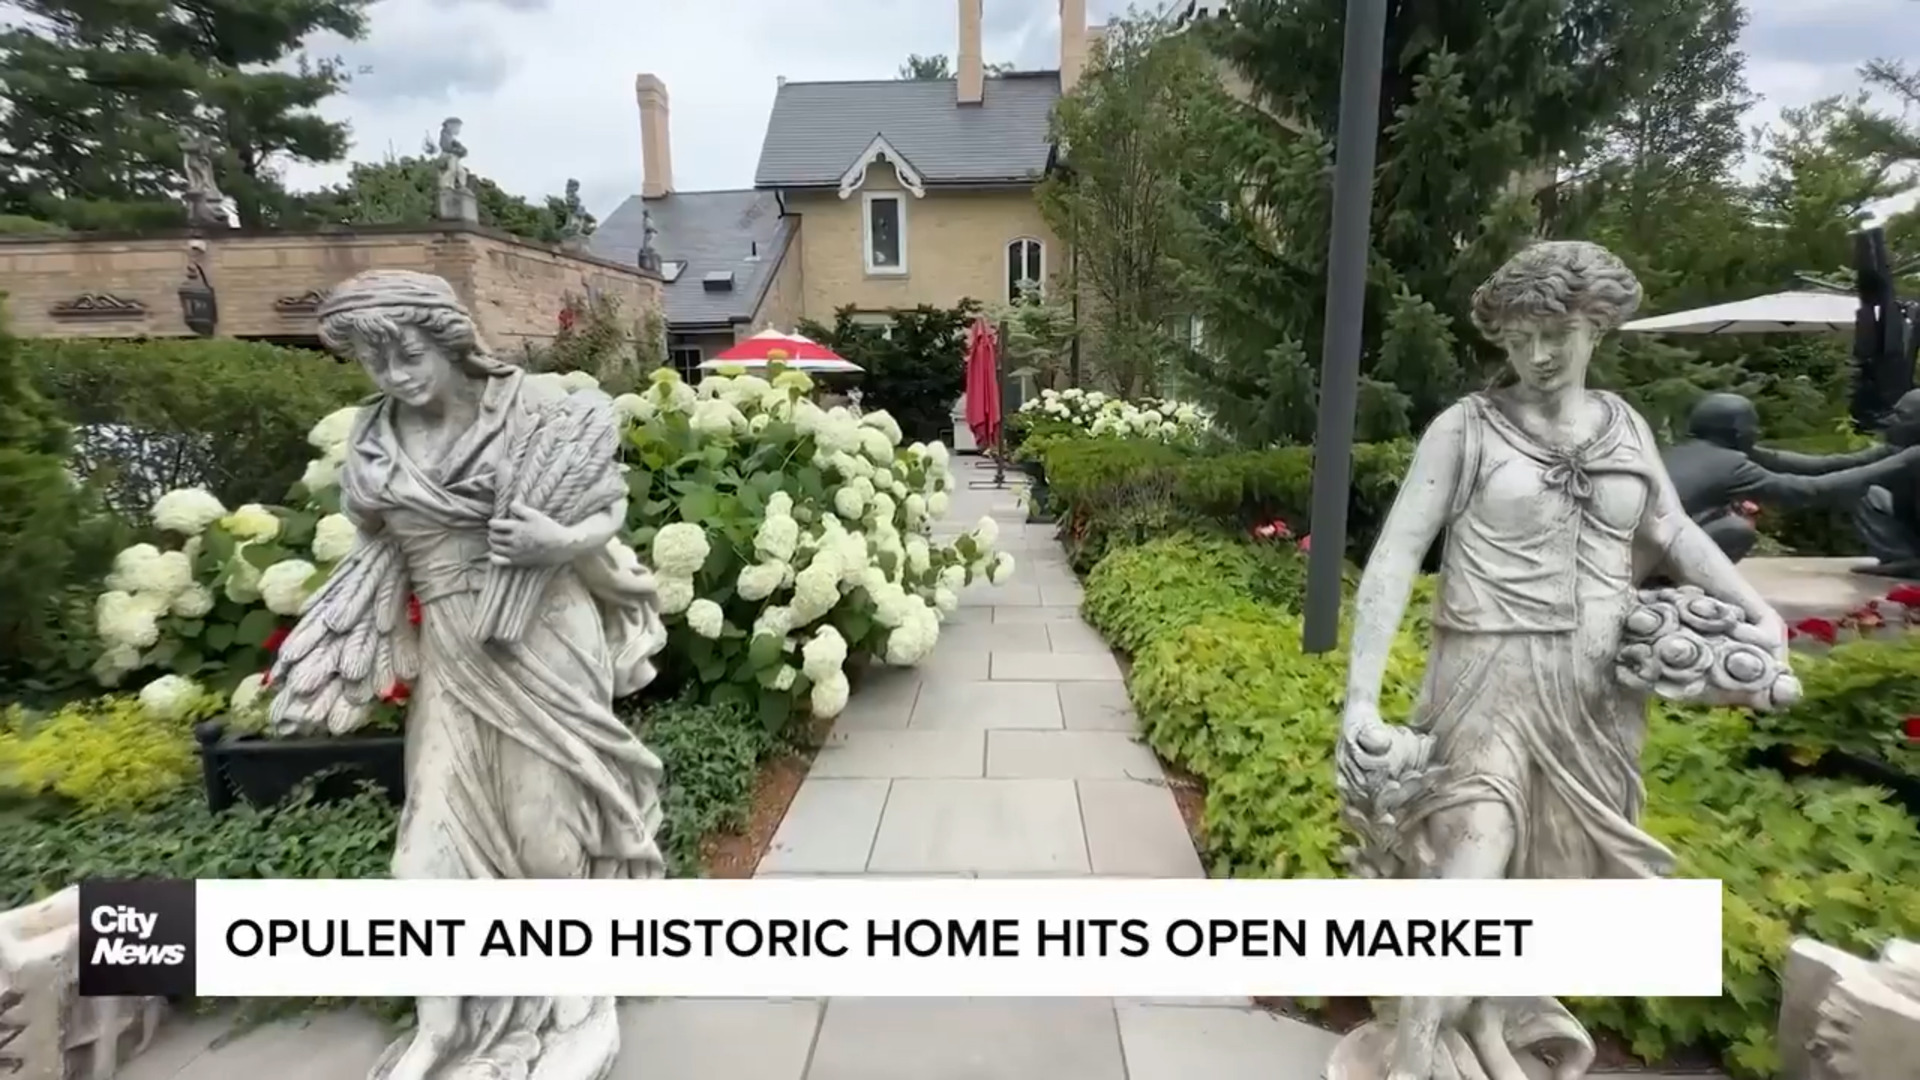 One of Canada's most historic homes hits open market